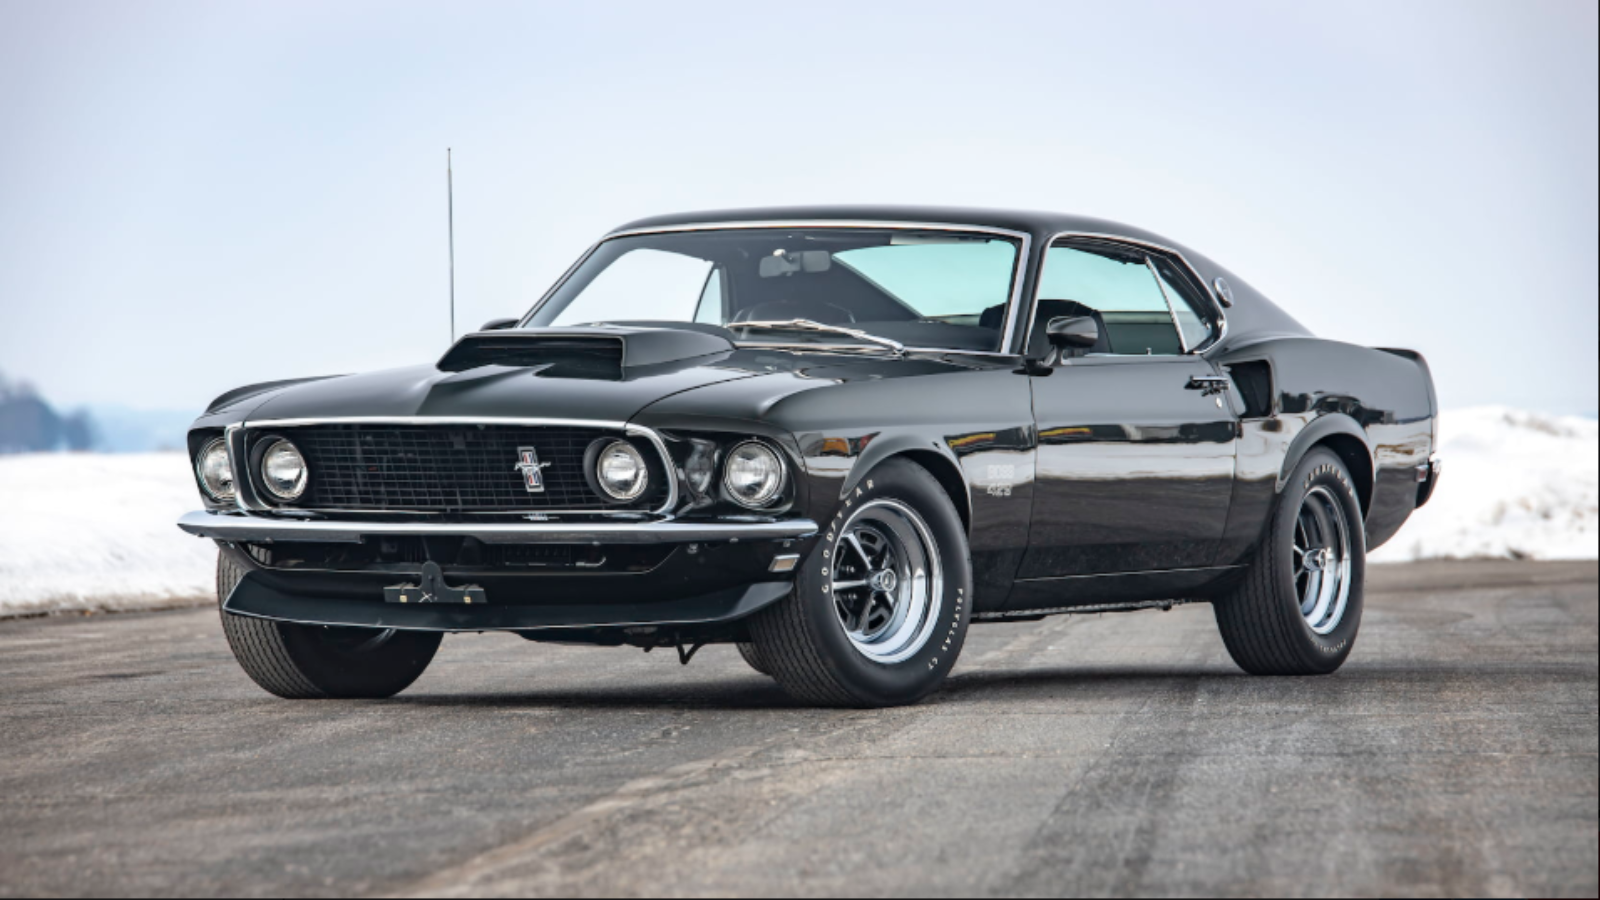 1969 Mustang BOSS 429 is a Stunning Fastback | Themustangsource